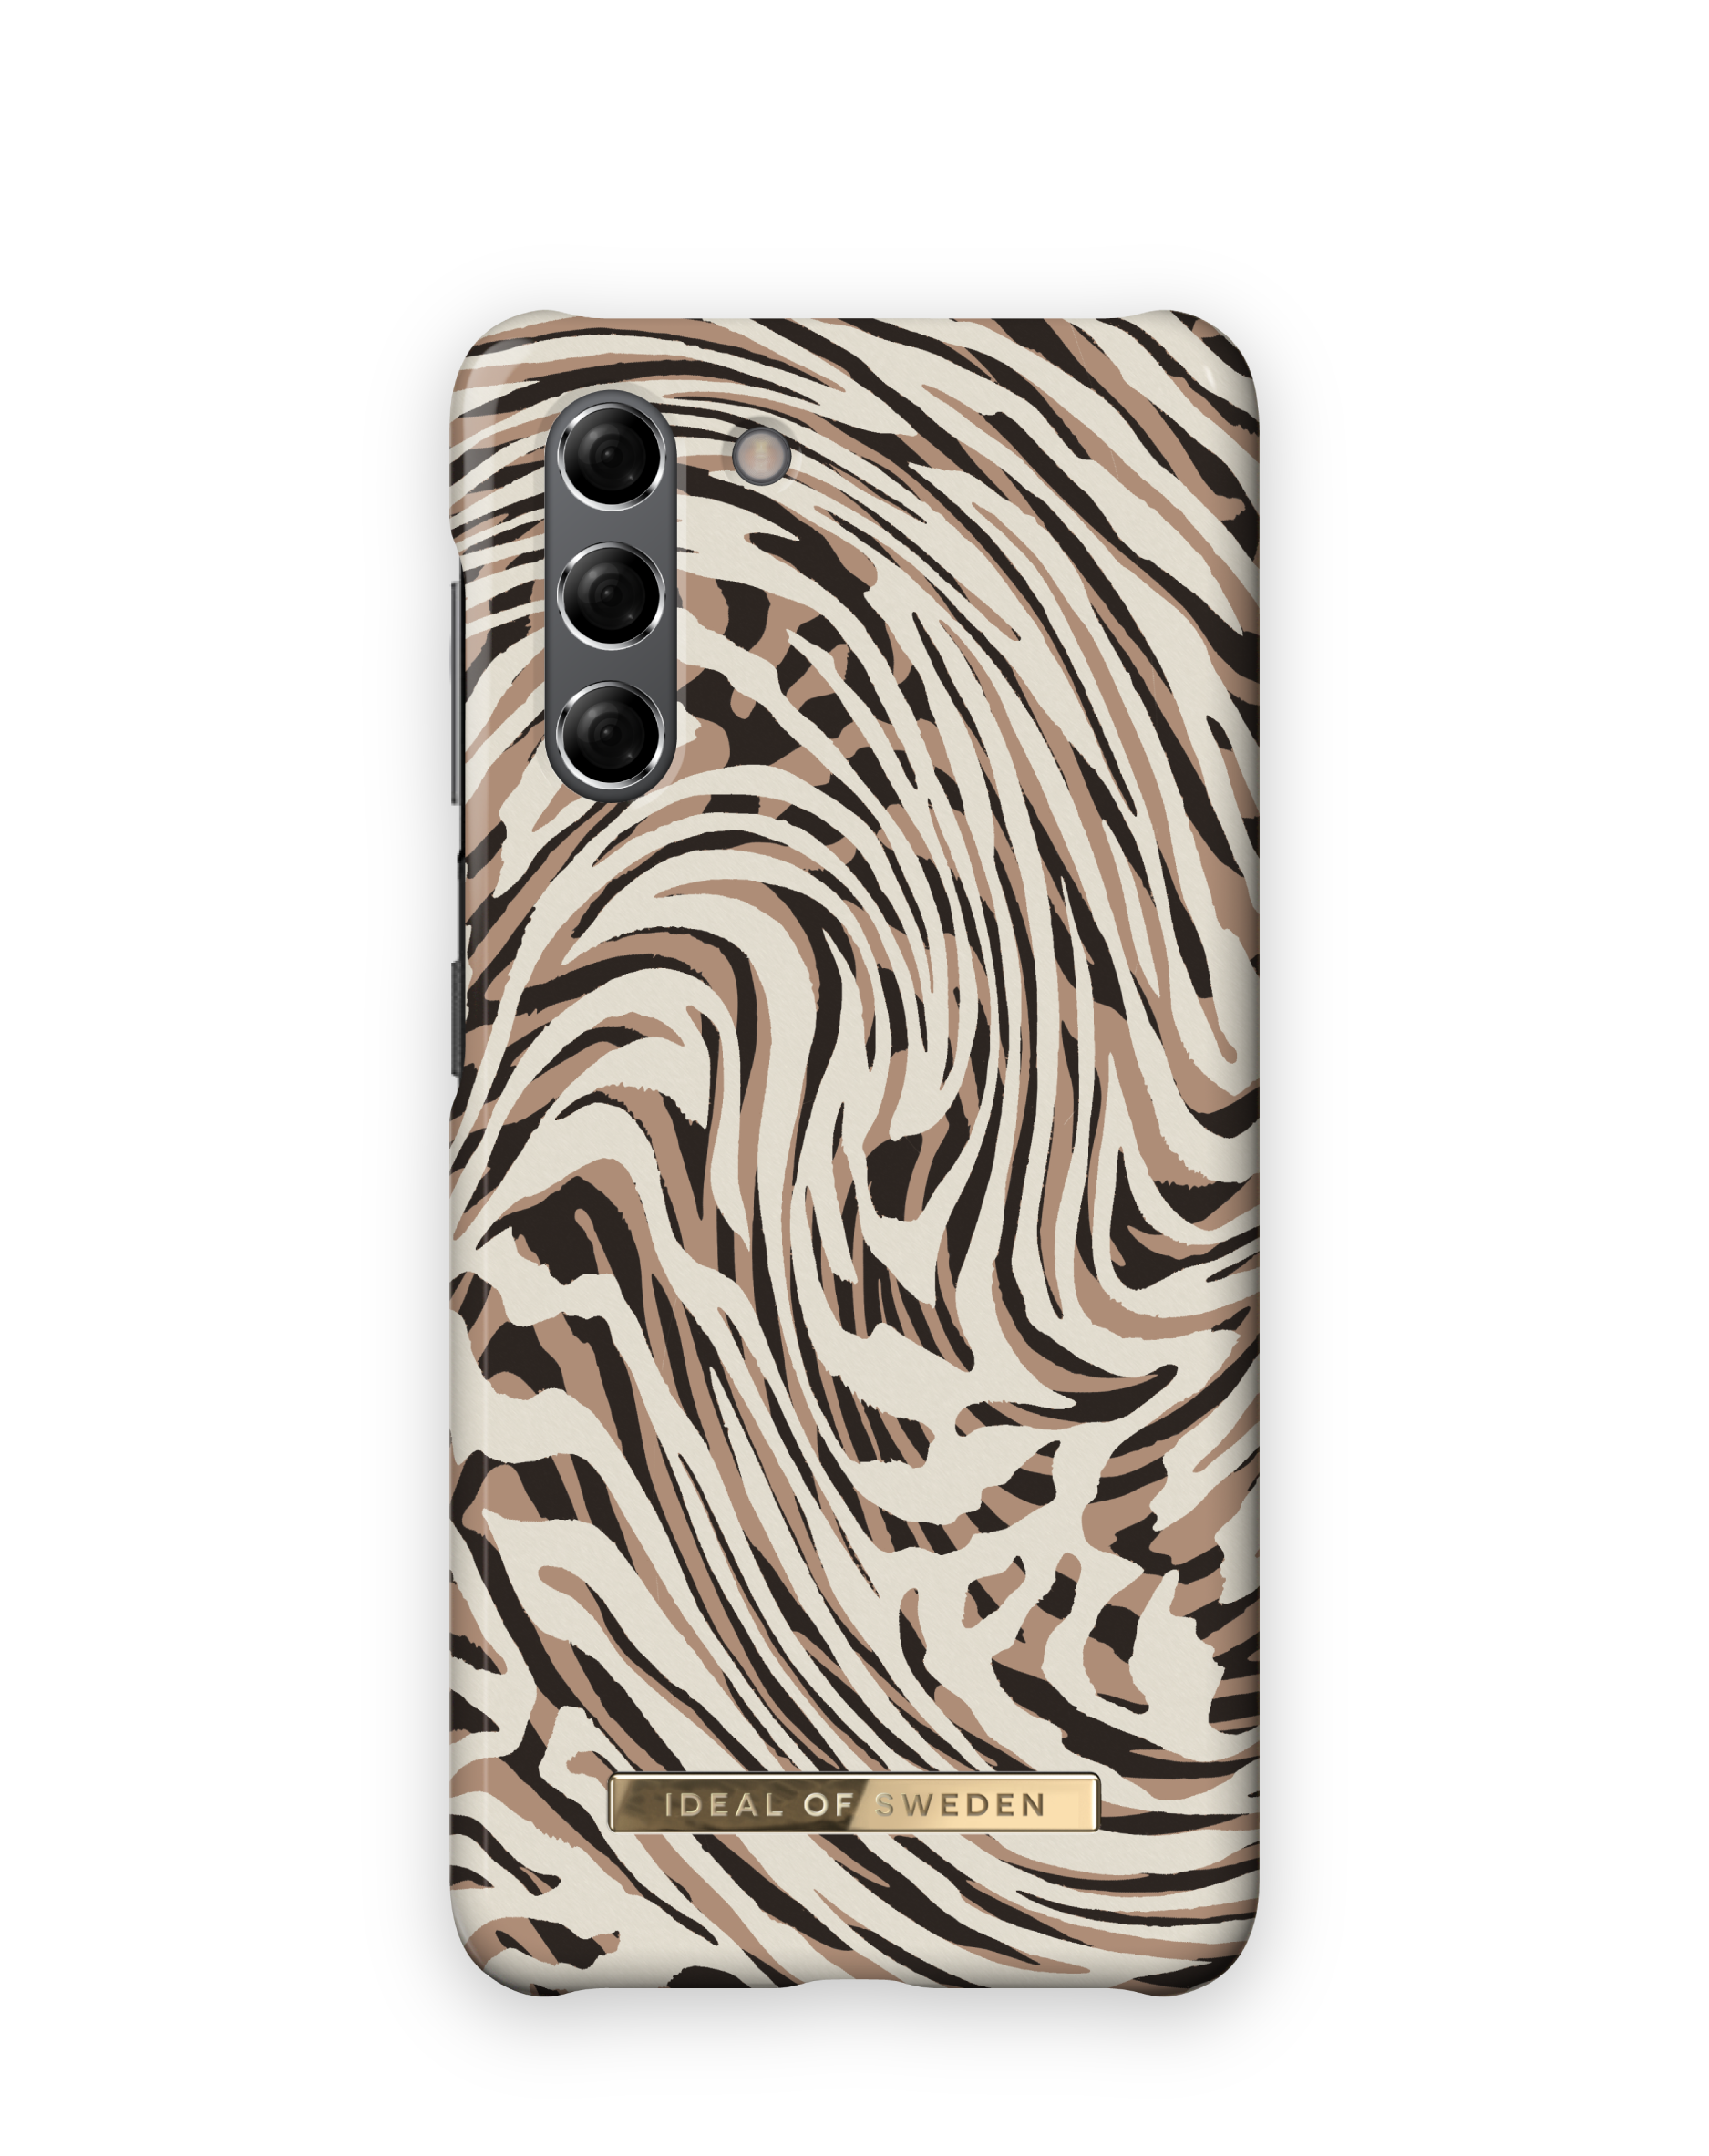 OF Backcover, IDFCSS22-S21-392, IDEAL Hypnotic SWEDEN Galaxy S21, Zebra Samsung,